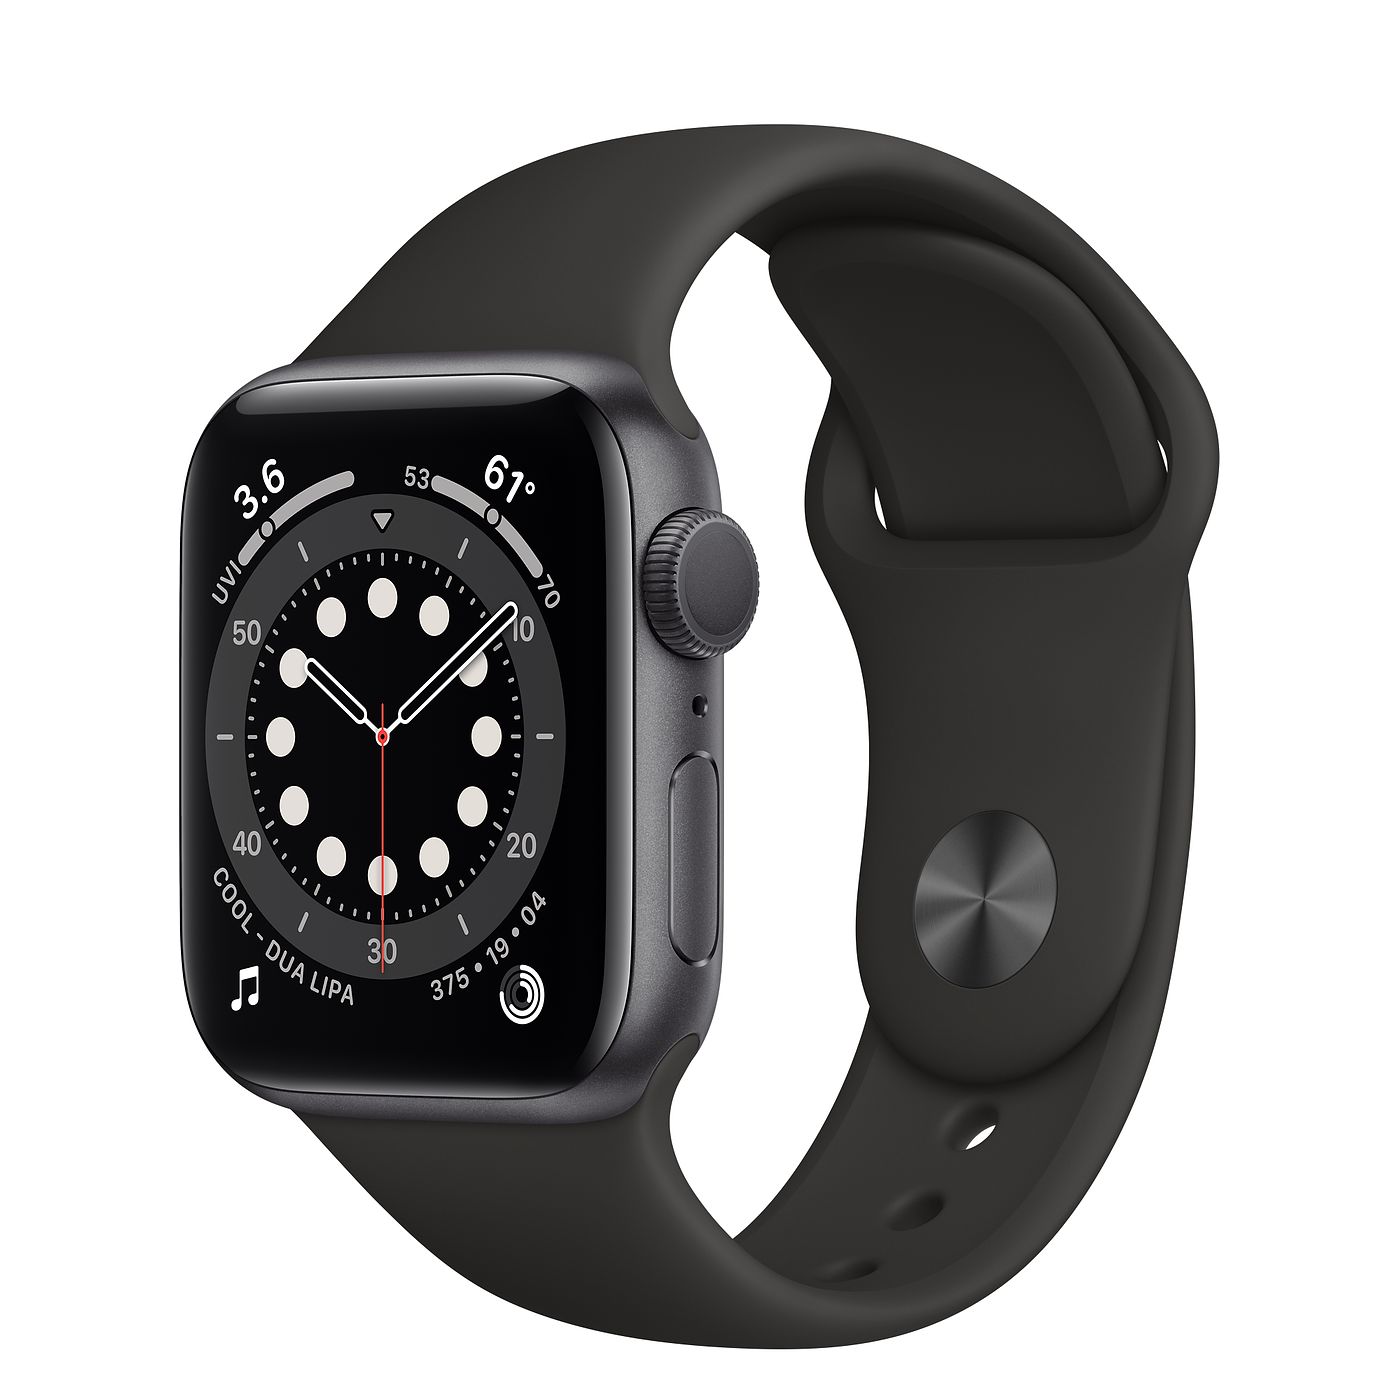 Apple Watch Series 6 GPS 40mm Space Gray Aluminum with Black Sport Band A2291